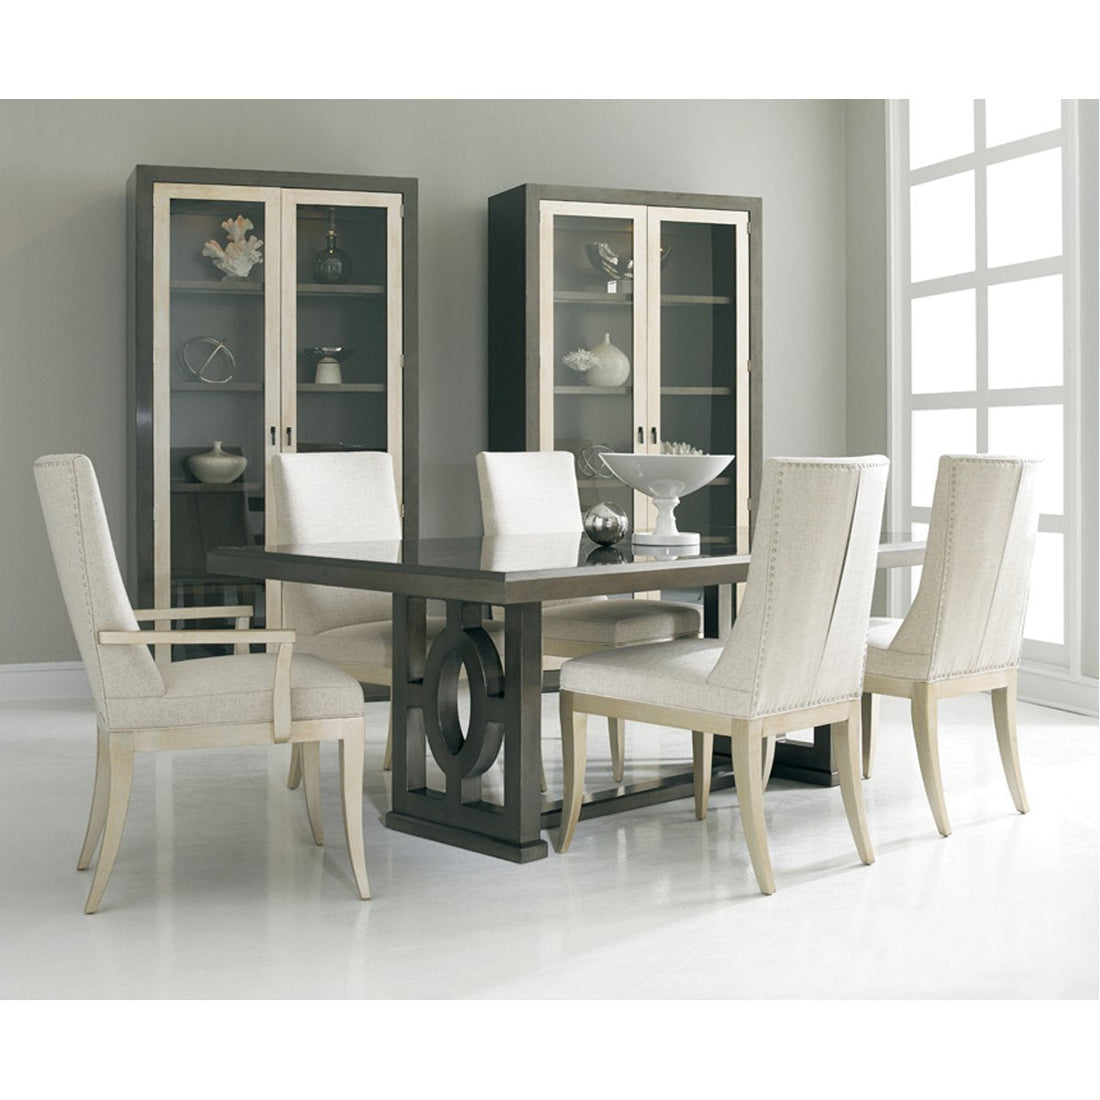 Hickory White Milan Side Chair